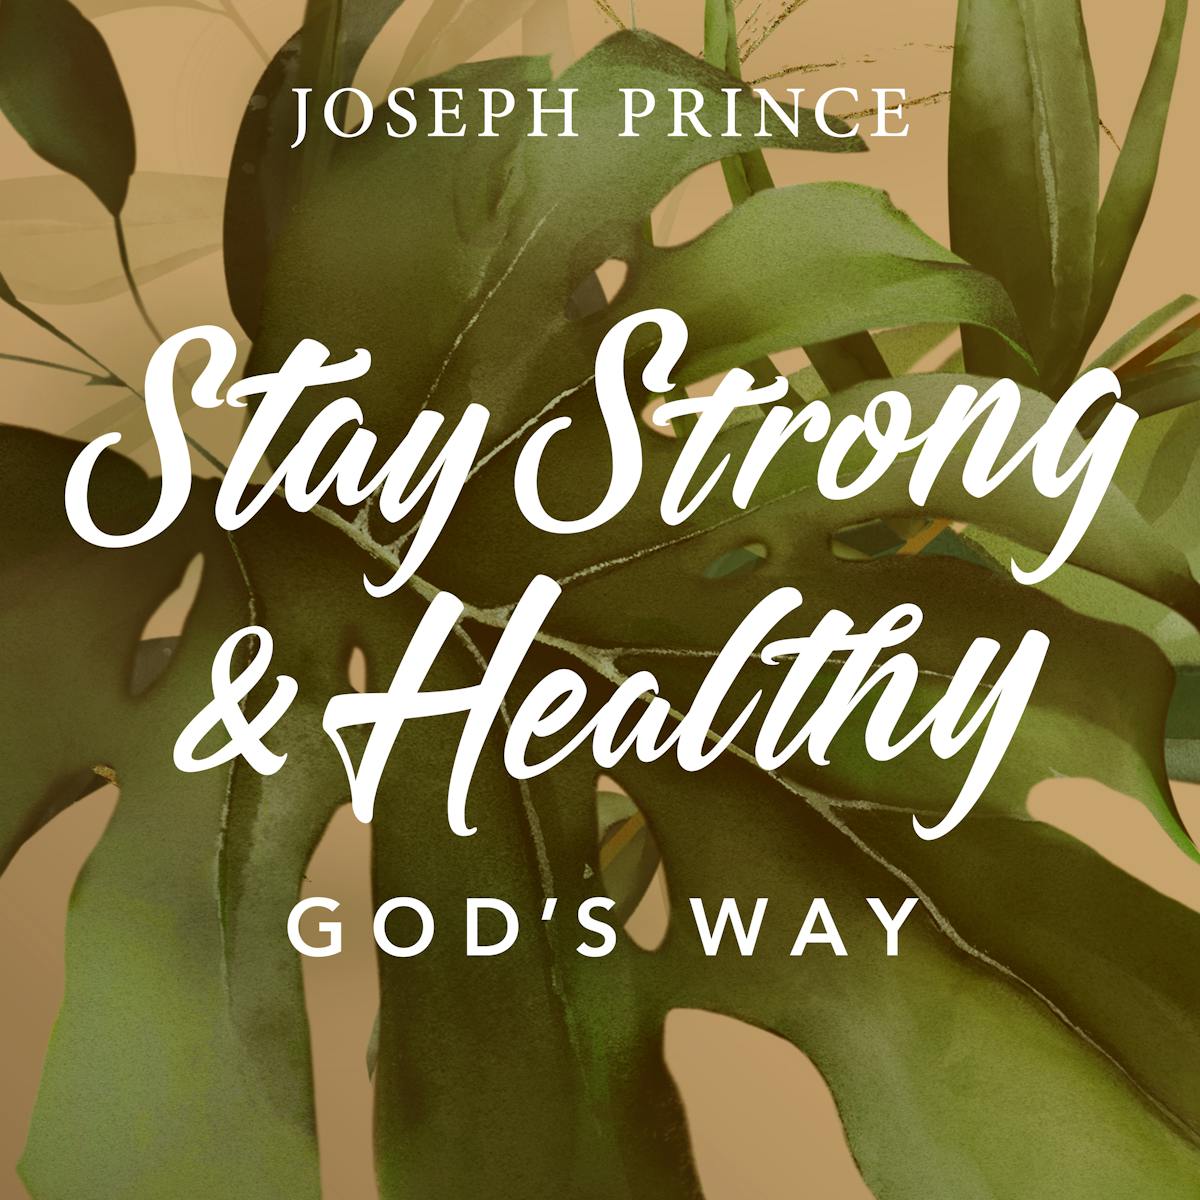 Stay Strong And Healthy God's Way | Sermons | JosephPrince.com